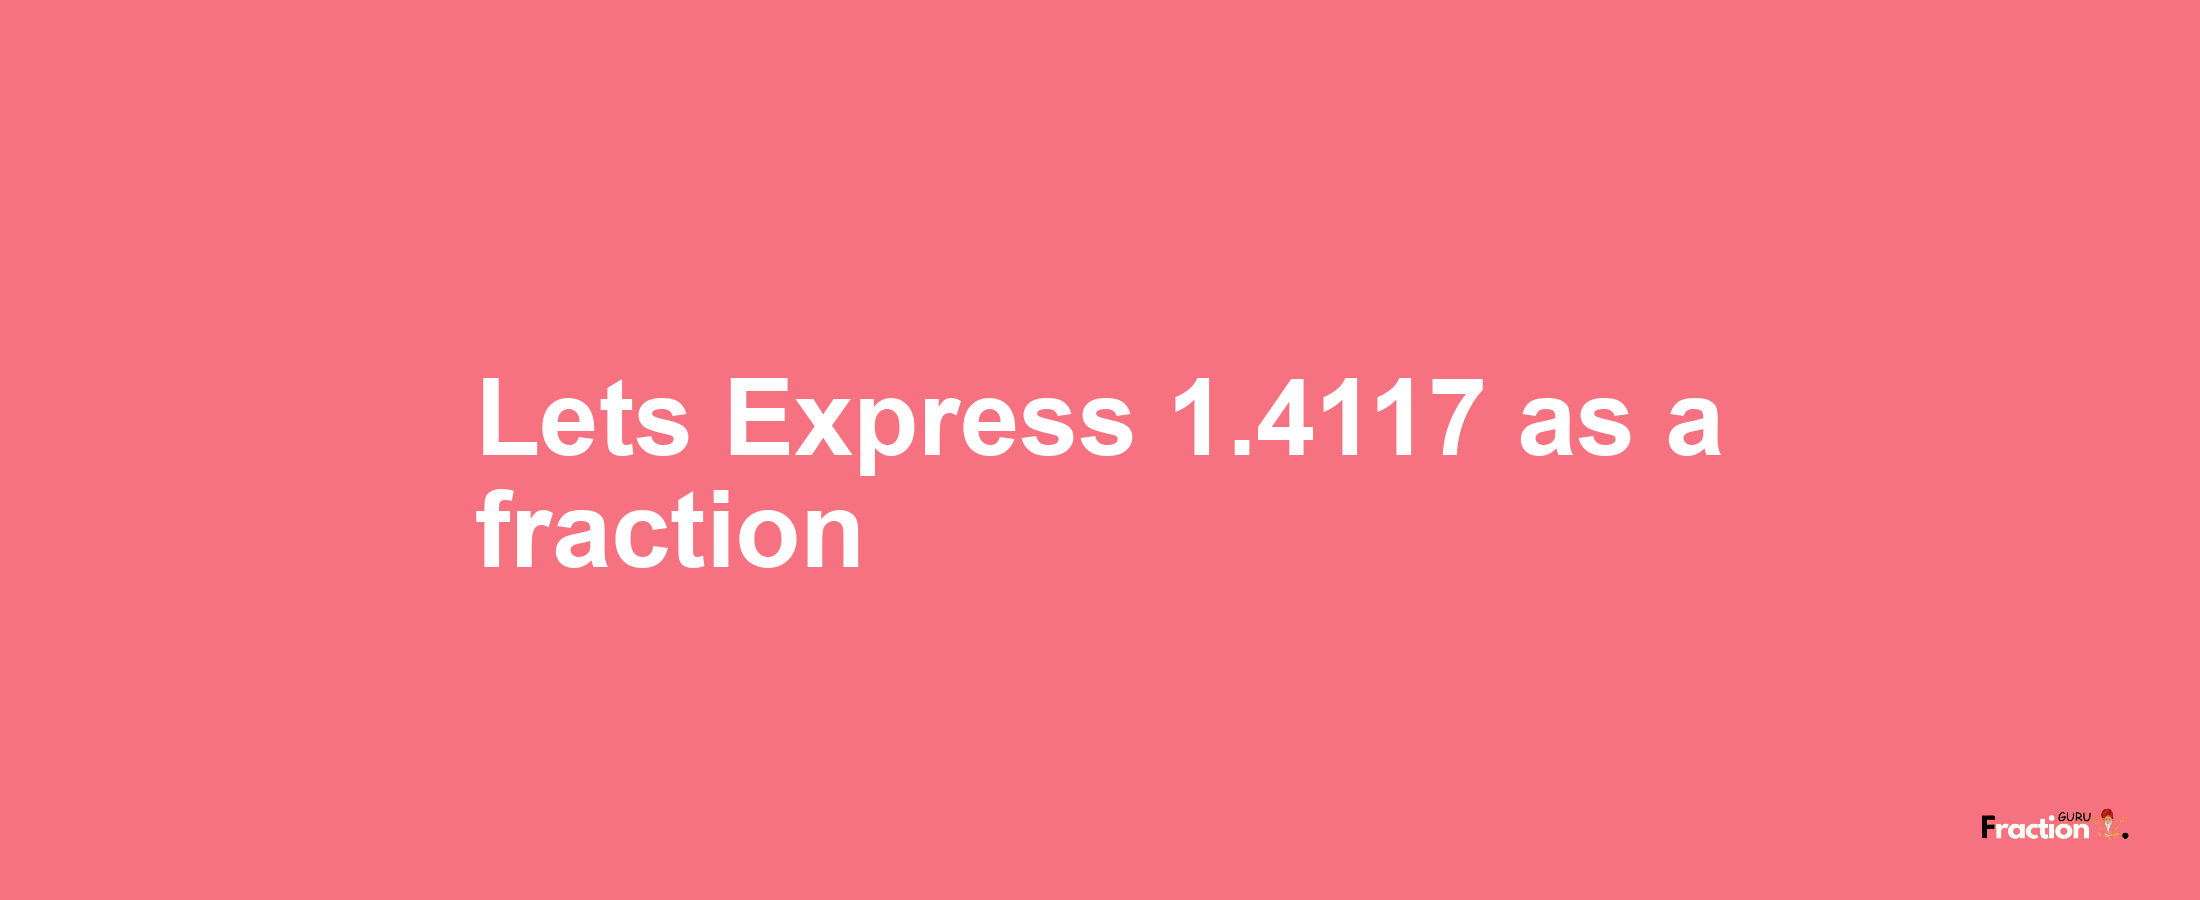 Lets Express 1.4117 as afraction